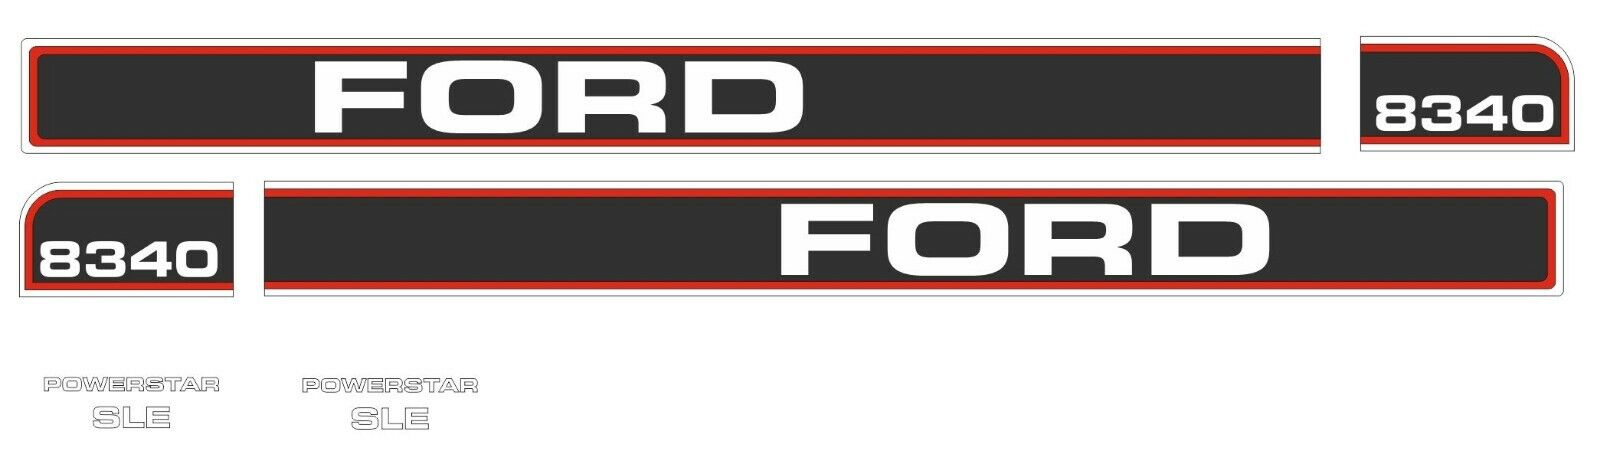 Sticker Decal Kit for Ford 8340 (until 1996)